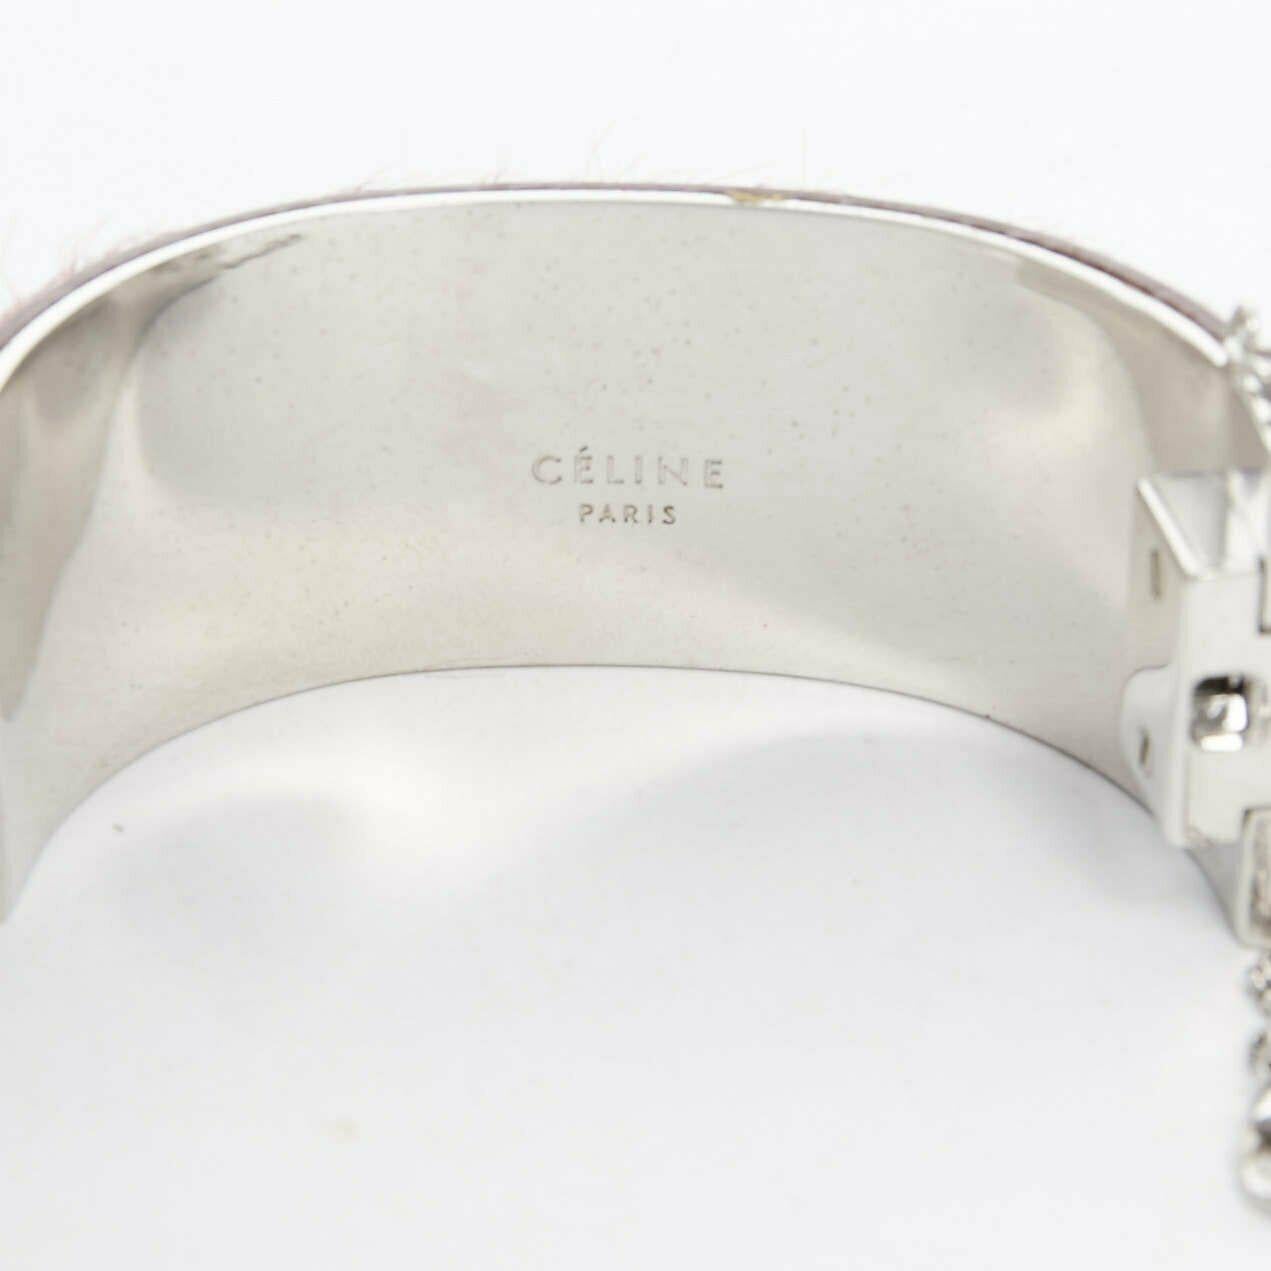 CELINE PHOEBE PHILO red horse hair leather silver hardware chained bangle cuff S 1